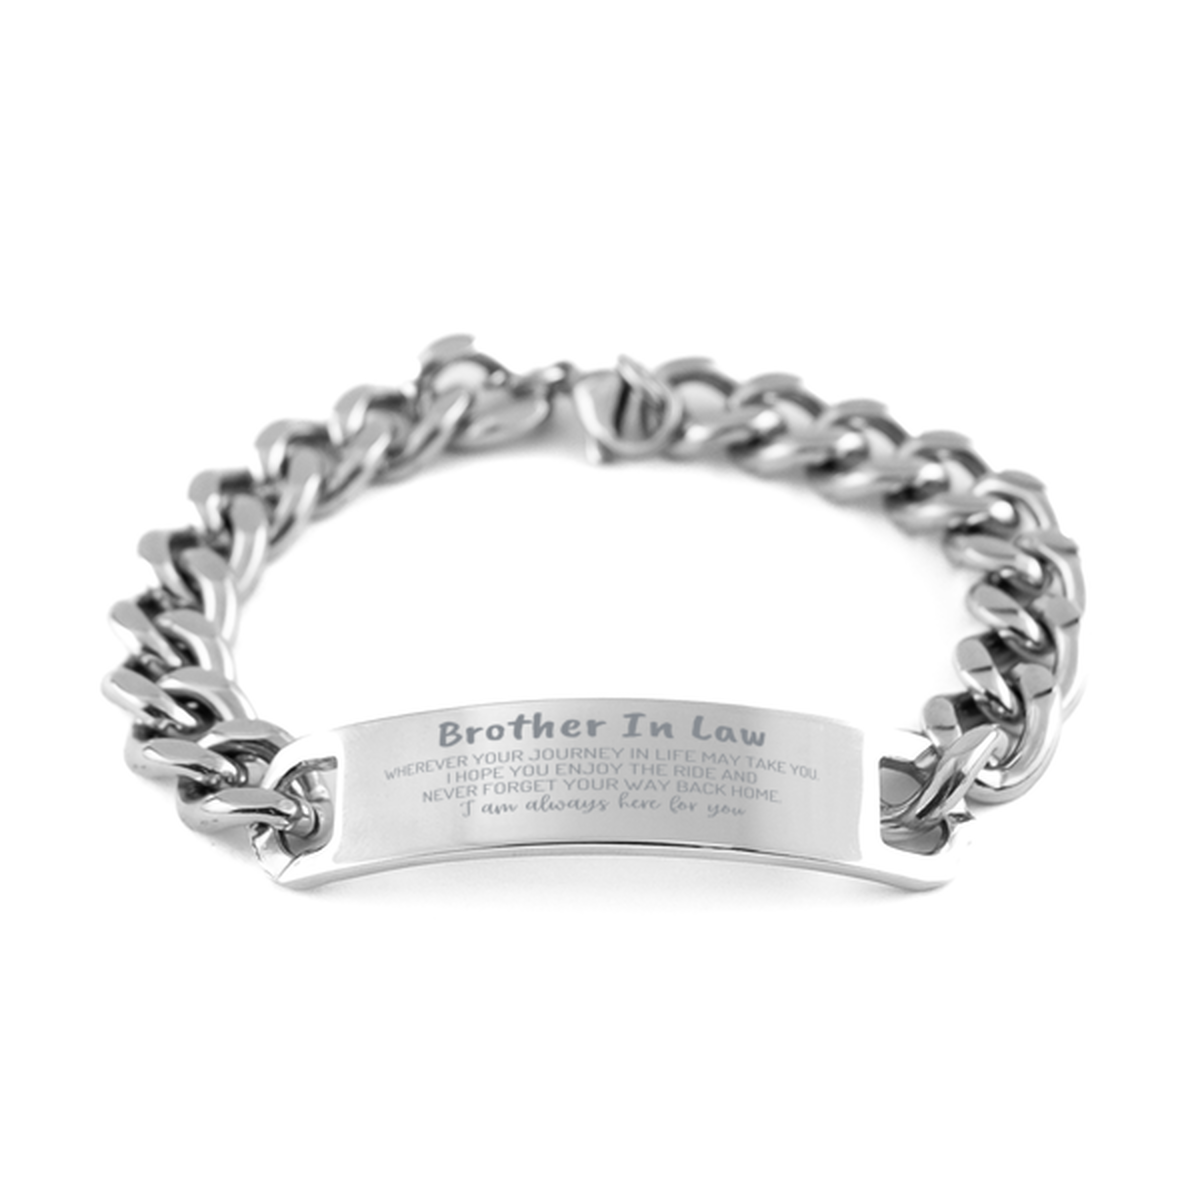 Brother In Law wherever your journey in life may take you, I am always here for you Brother In Law Cuban Chain Stainless Steel Bracelet, Awesome Christmas Gifts For Brother In Law, Brother In Law Birthday Gifts for Men Women Family Loved One